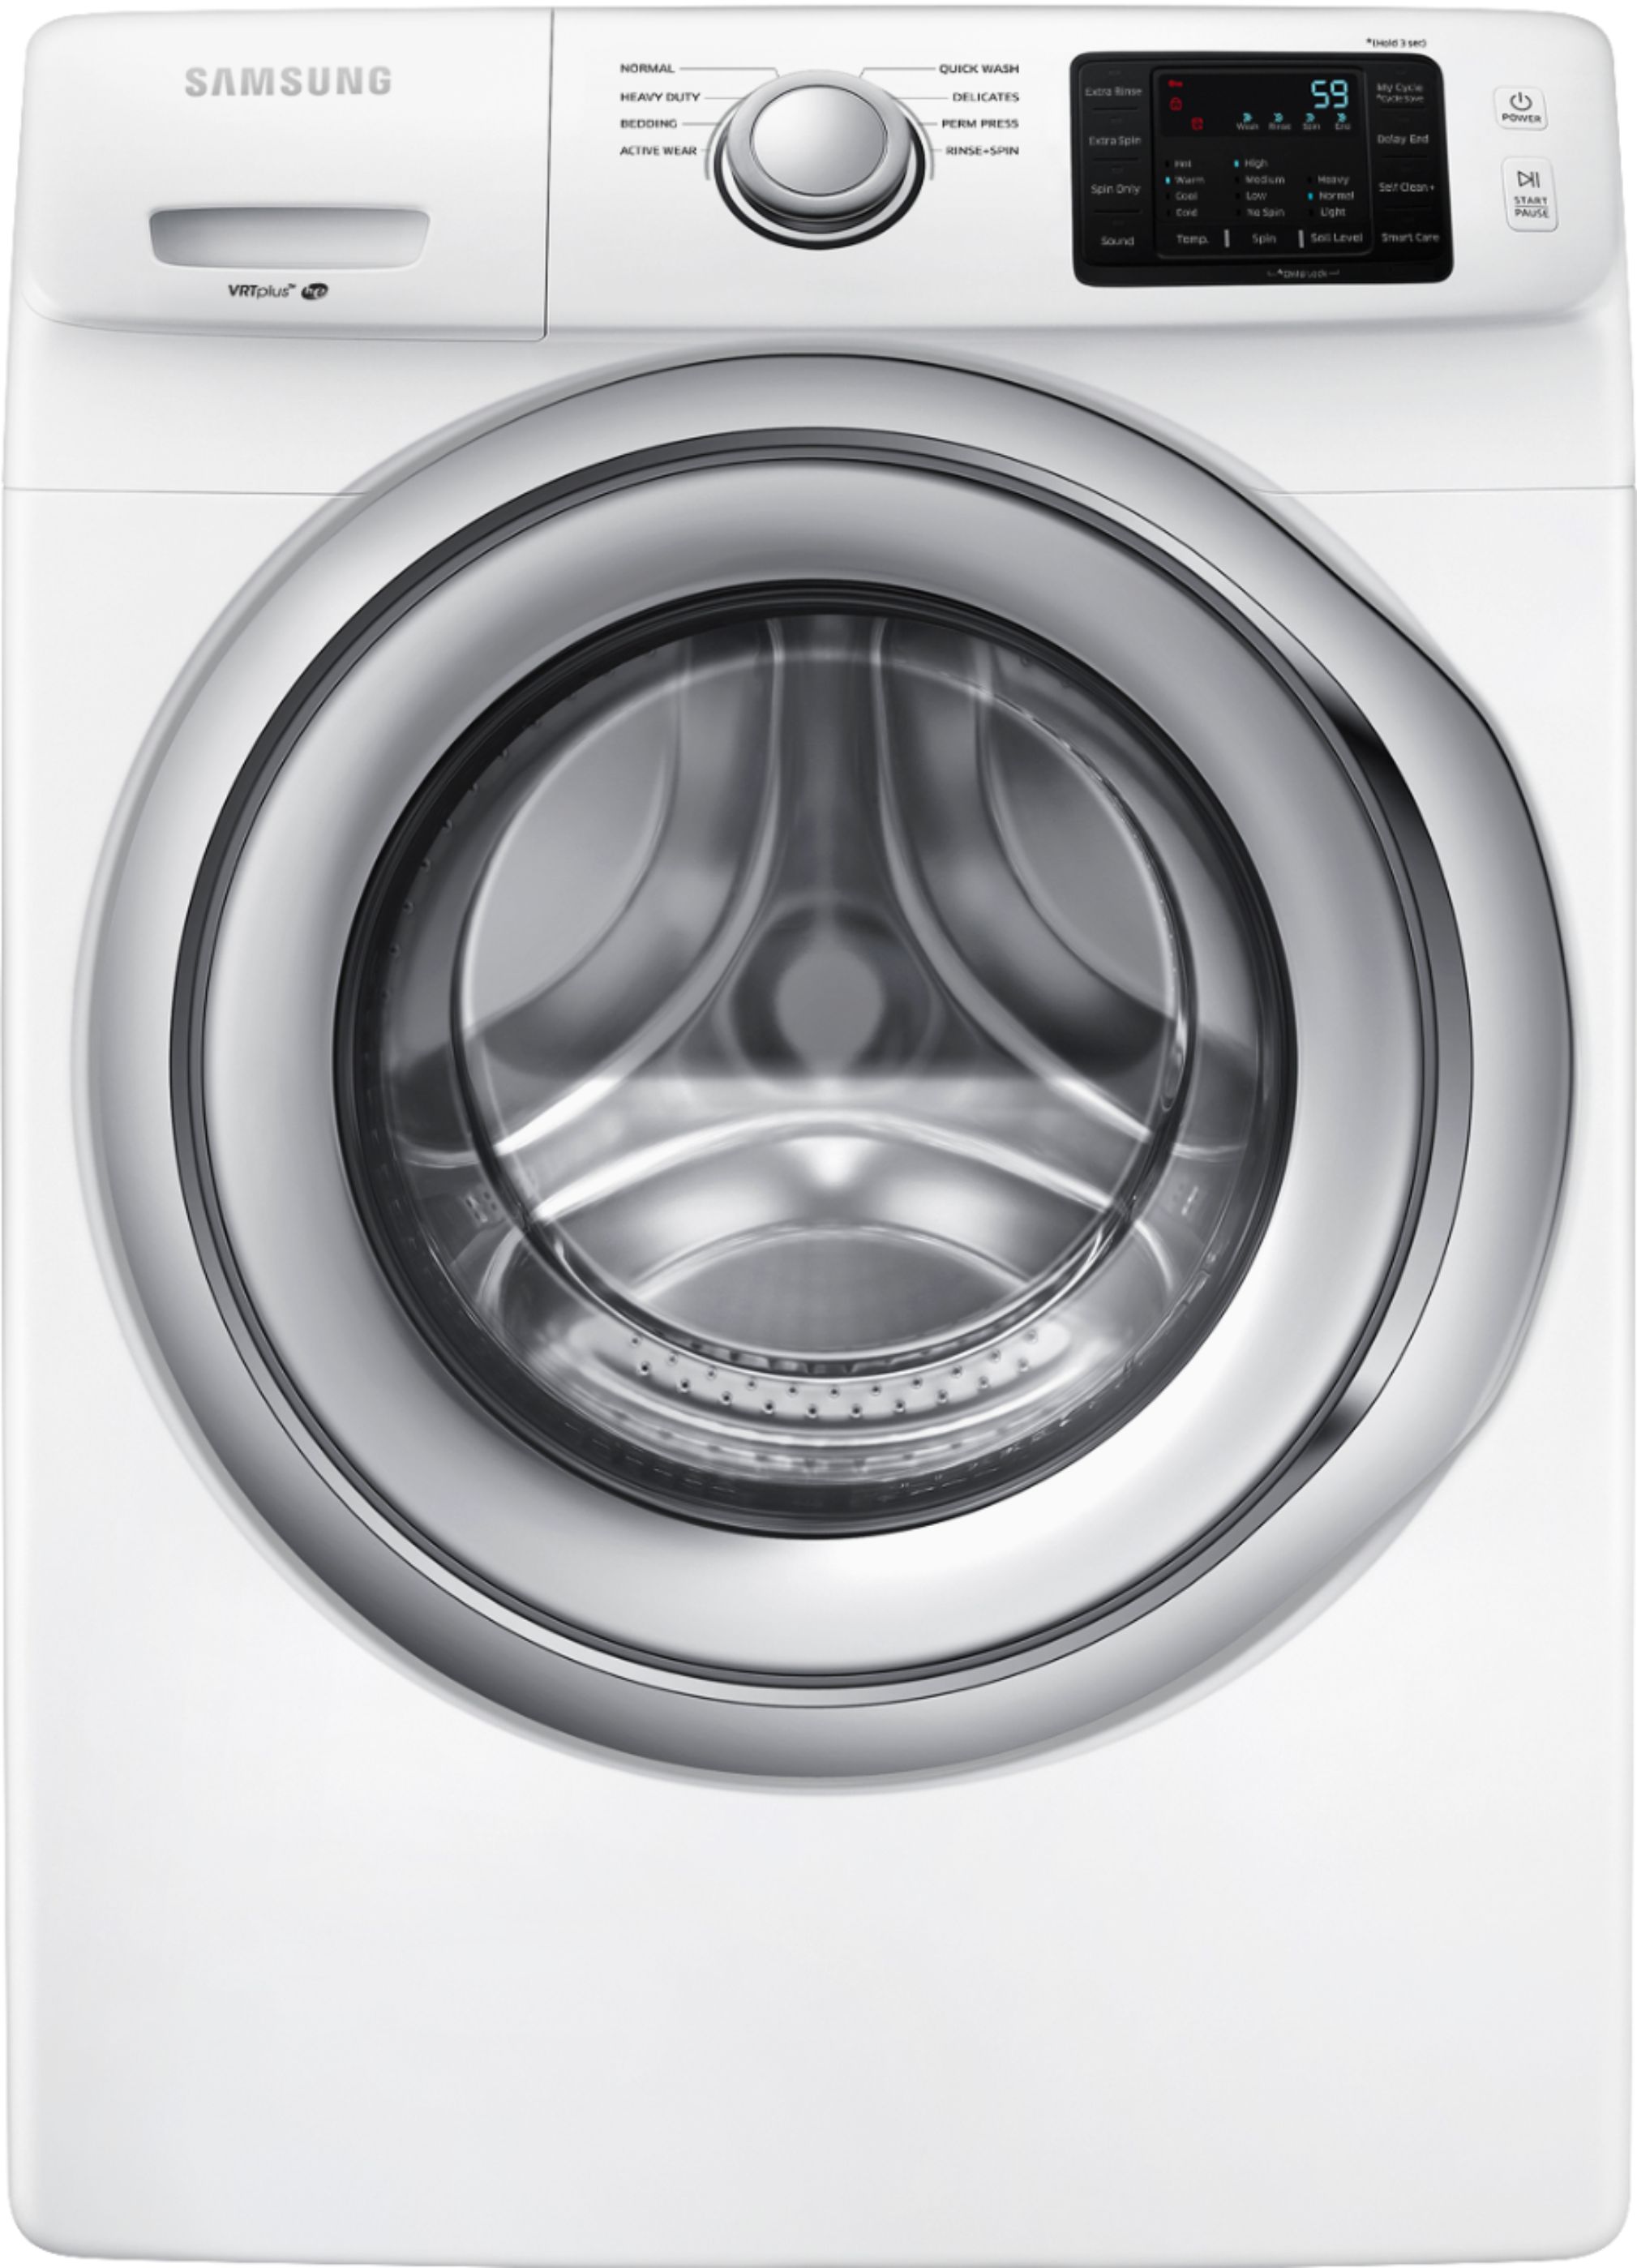 Samsung 4 5 Cu Ft 8 Cycle Front Loading Washer White Wf45n5300aw Best Buy